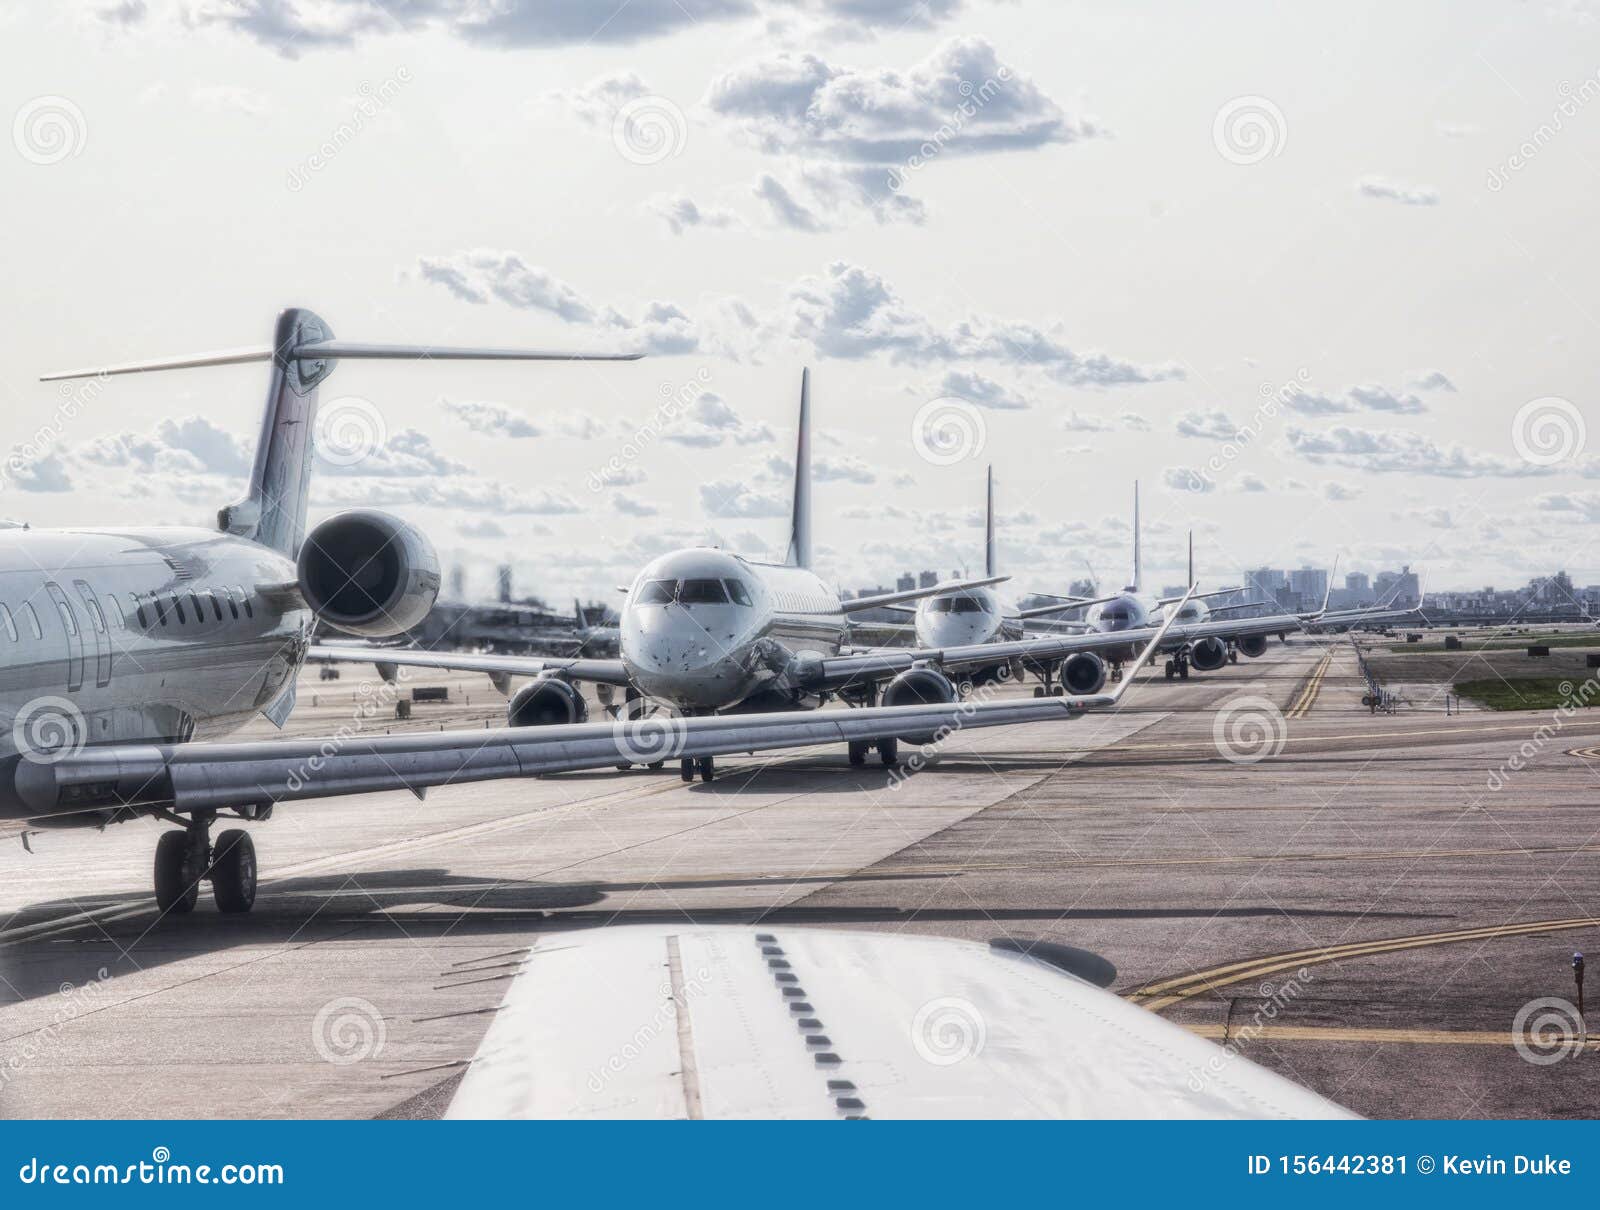 commercial airliners waiting for takeoff 